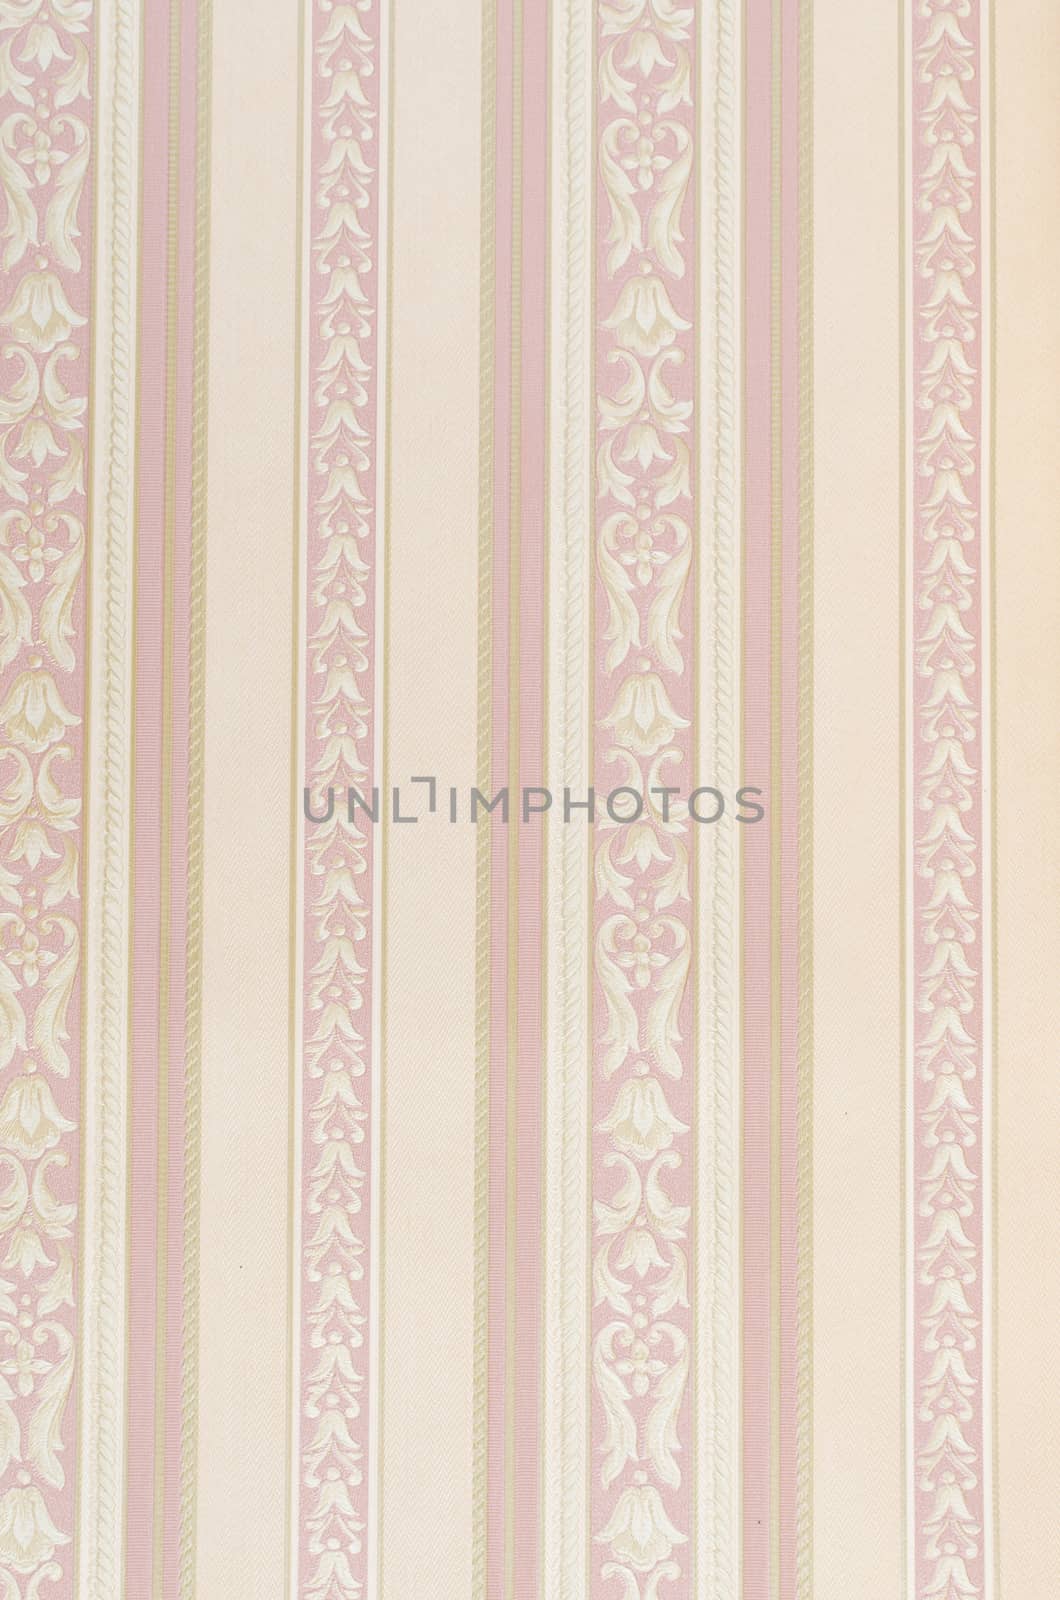 texture background pattern Element of design by nopparats